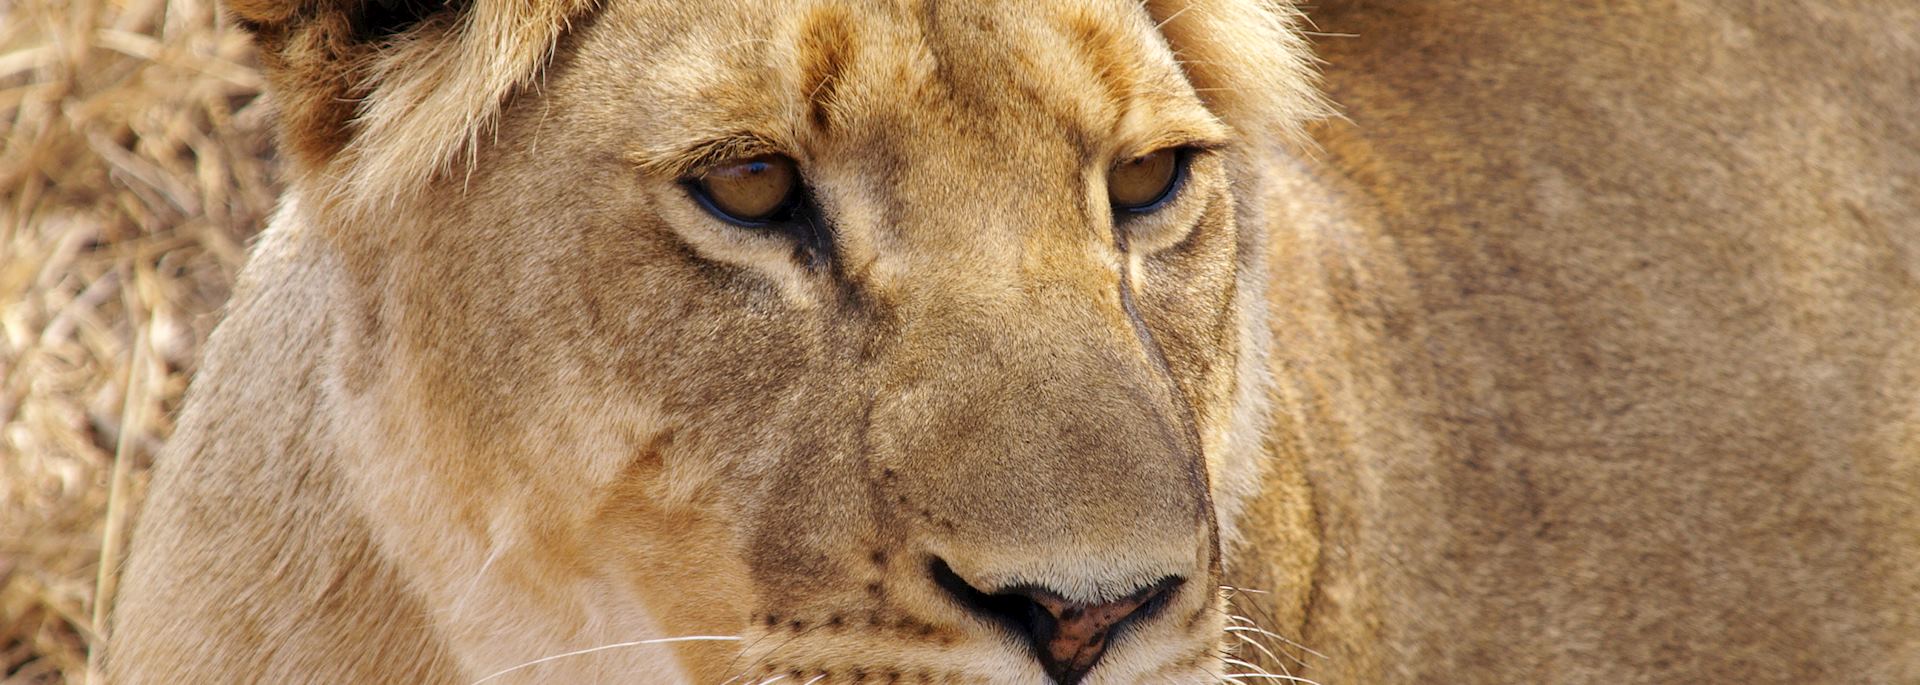 Lioness in Greater Makalali Game Reserve